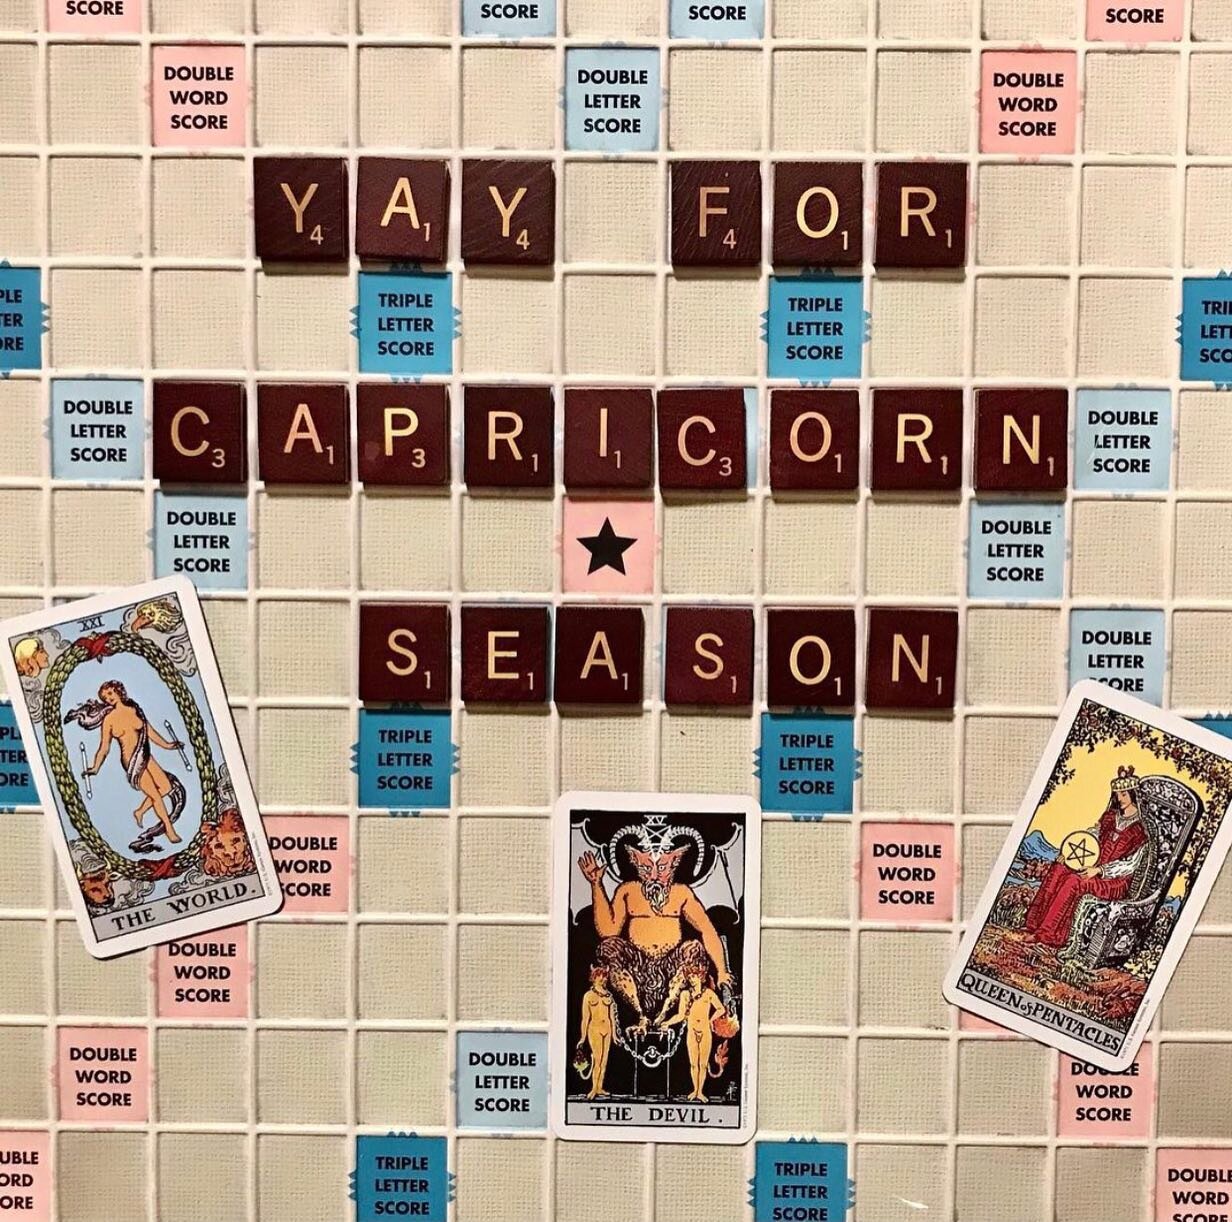 Wishing a very Happy Birthday to all the Capricorns out there in IG Land! 🎉 I hope your birthday season is fabulous and brings you much happiness! Shout out to the Capricorn gang especially &hellip; because they&rsquo;ve putting up with Planet Satur